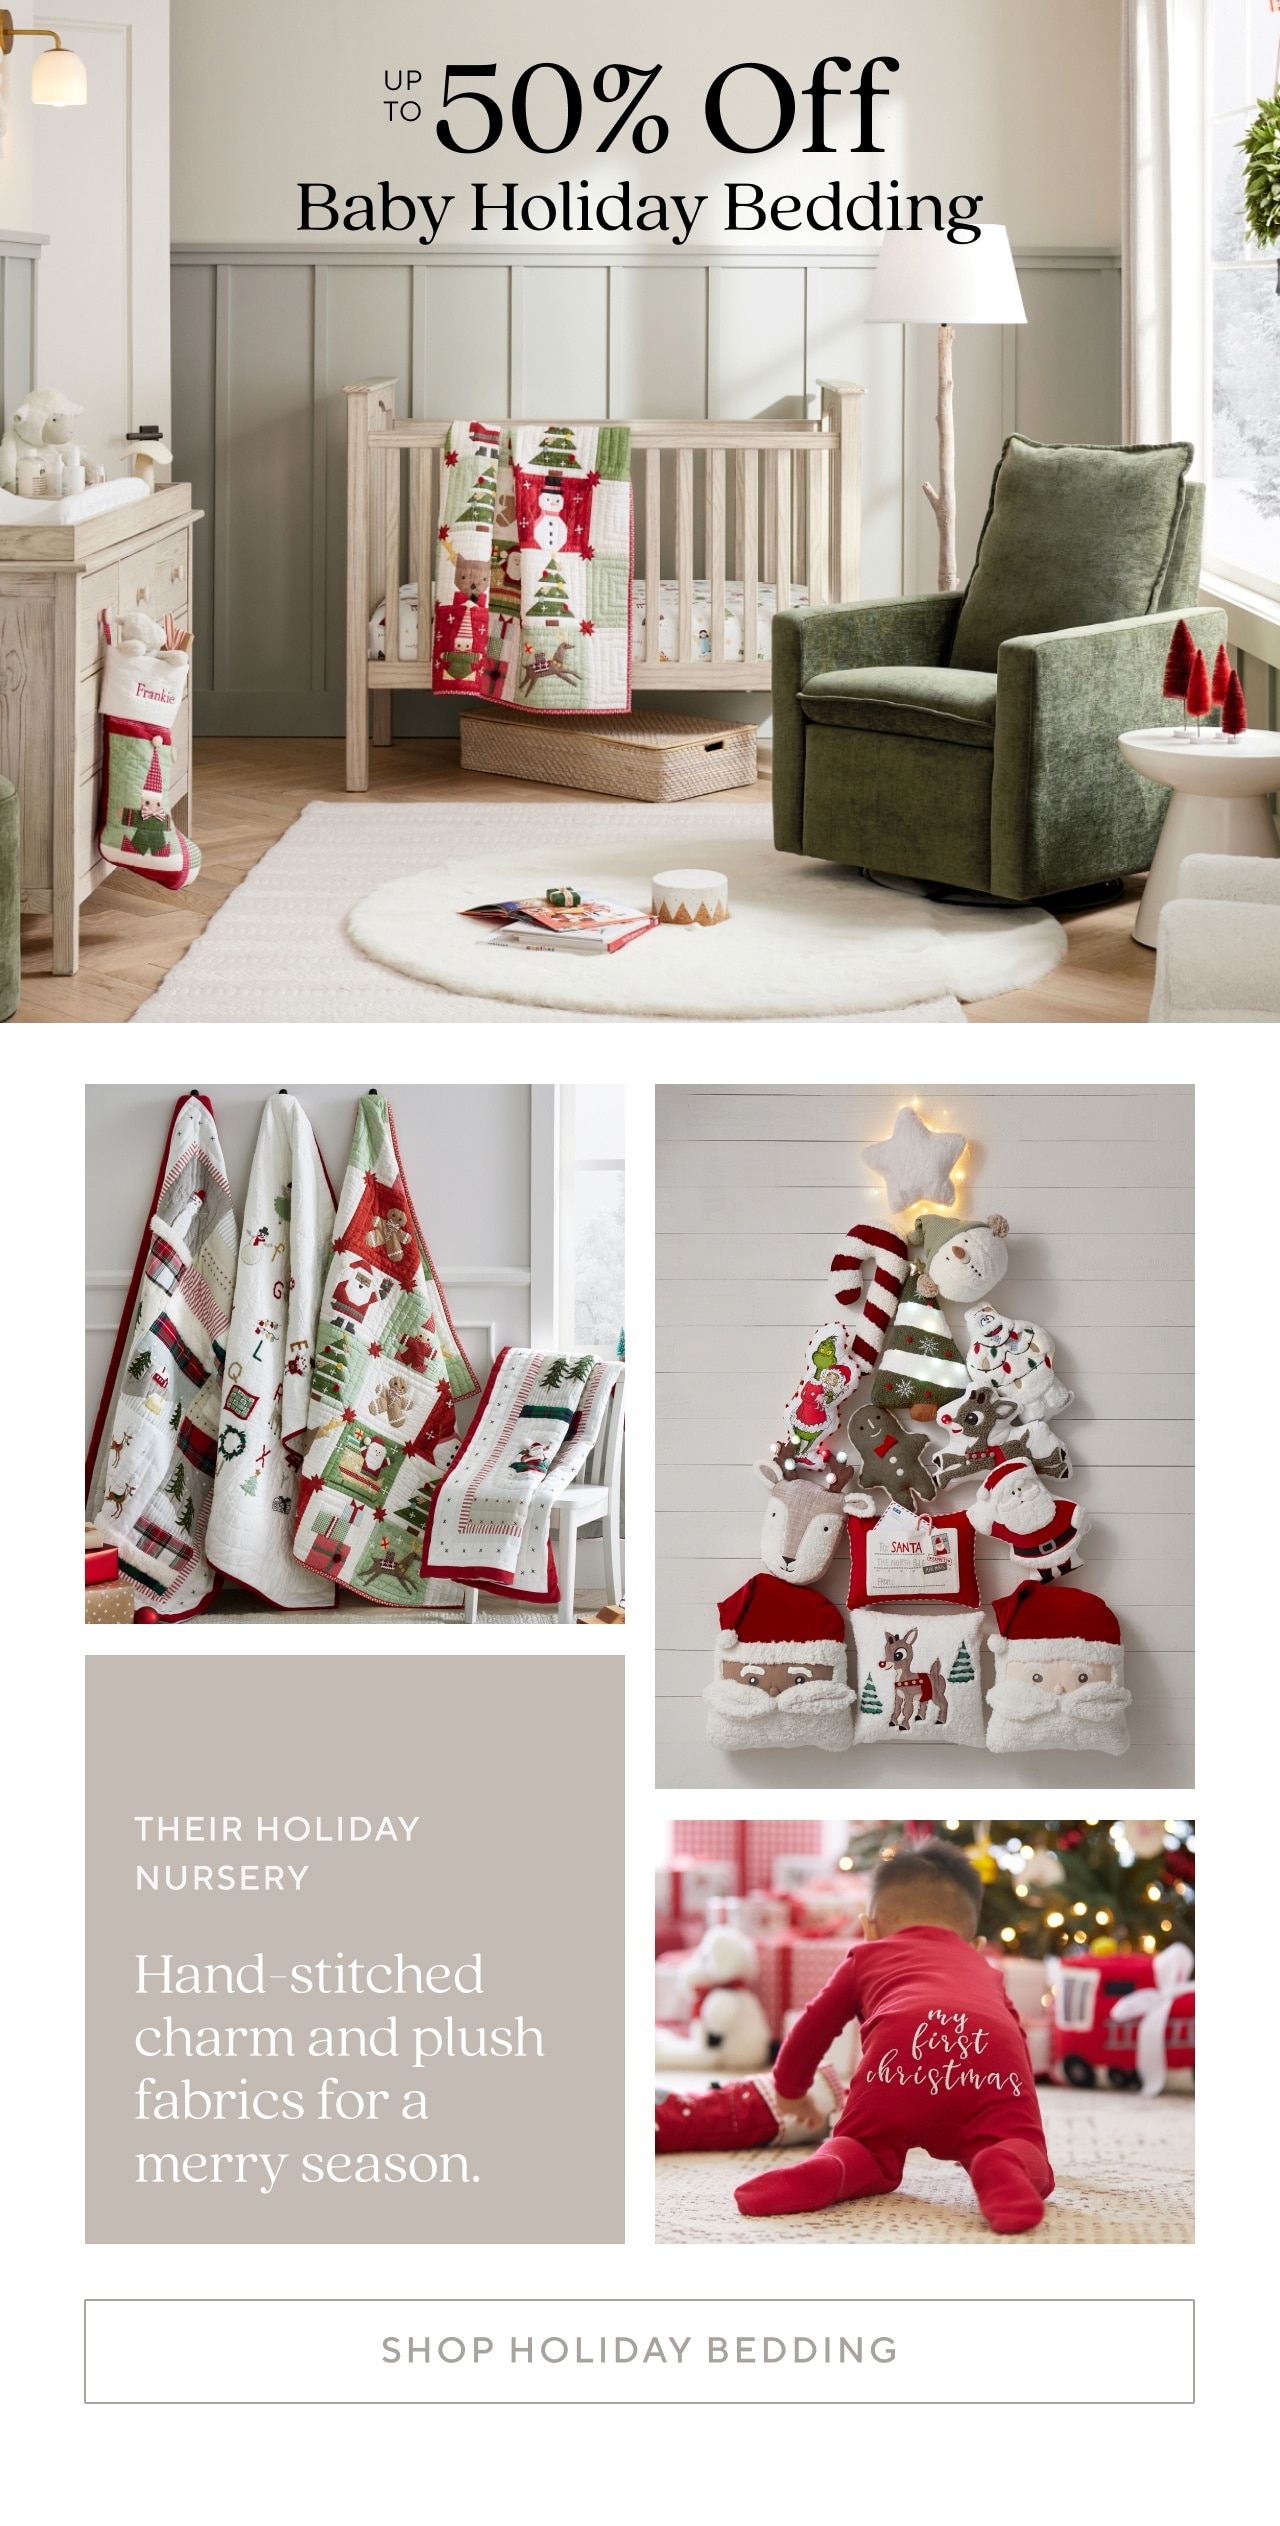 SHOP BABY HOLIDAY BEDDING